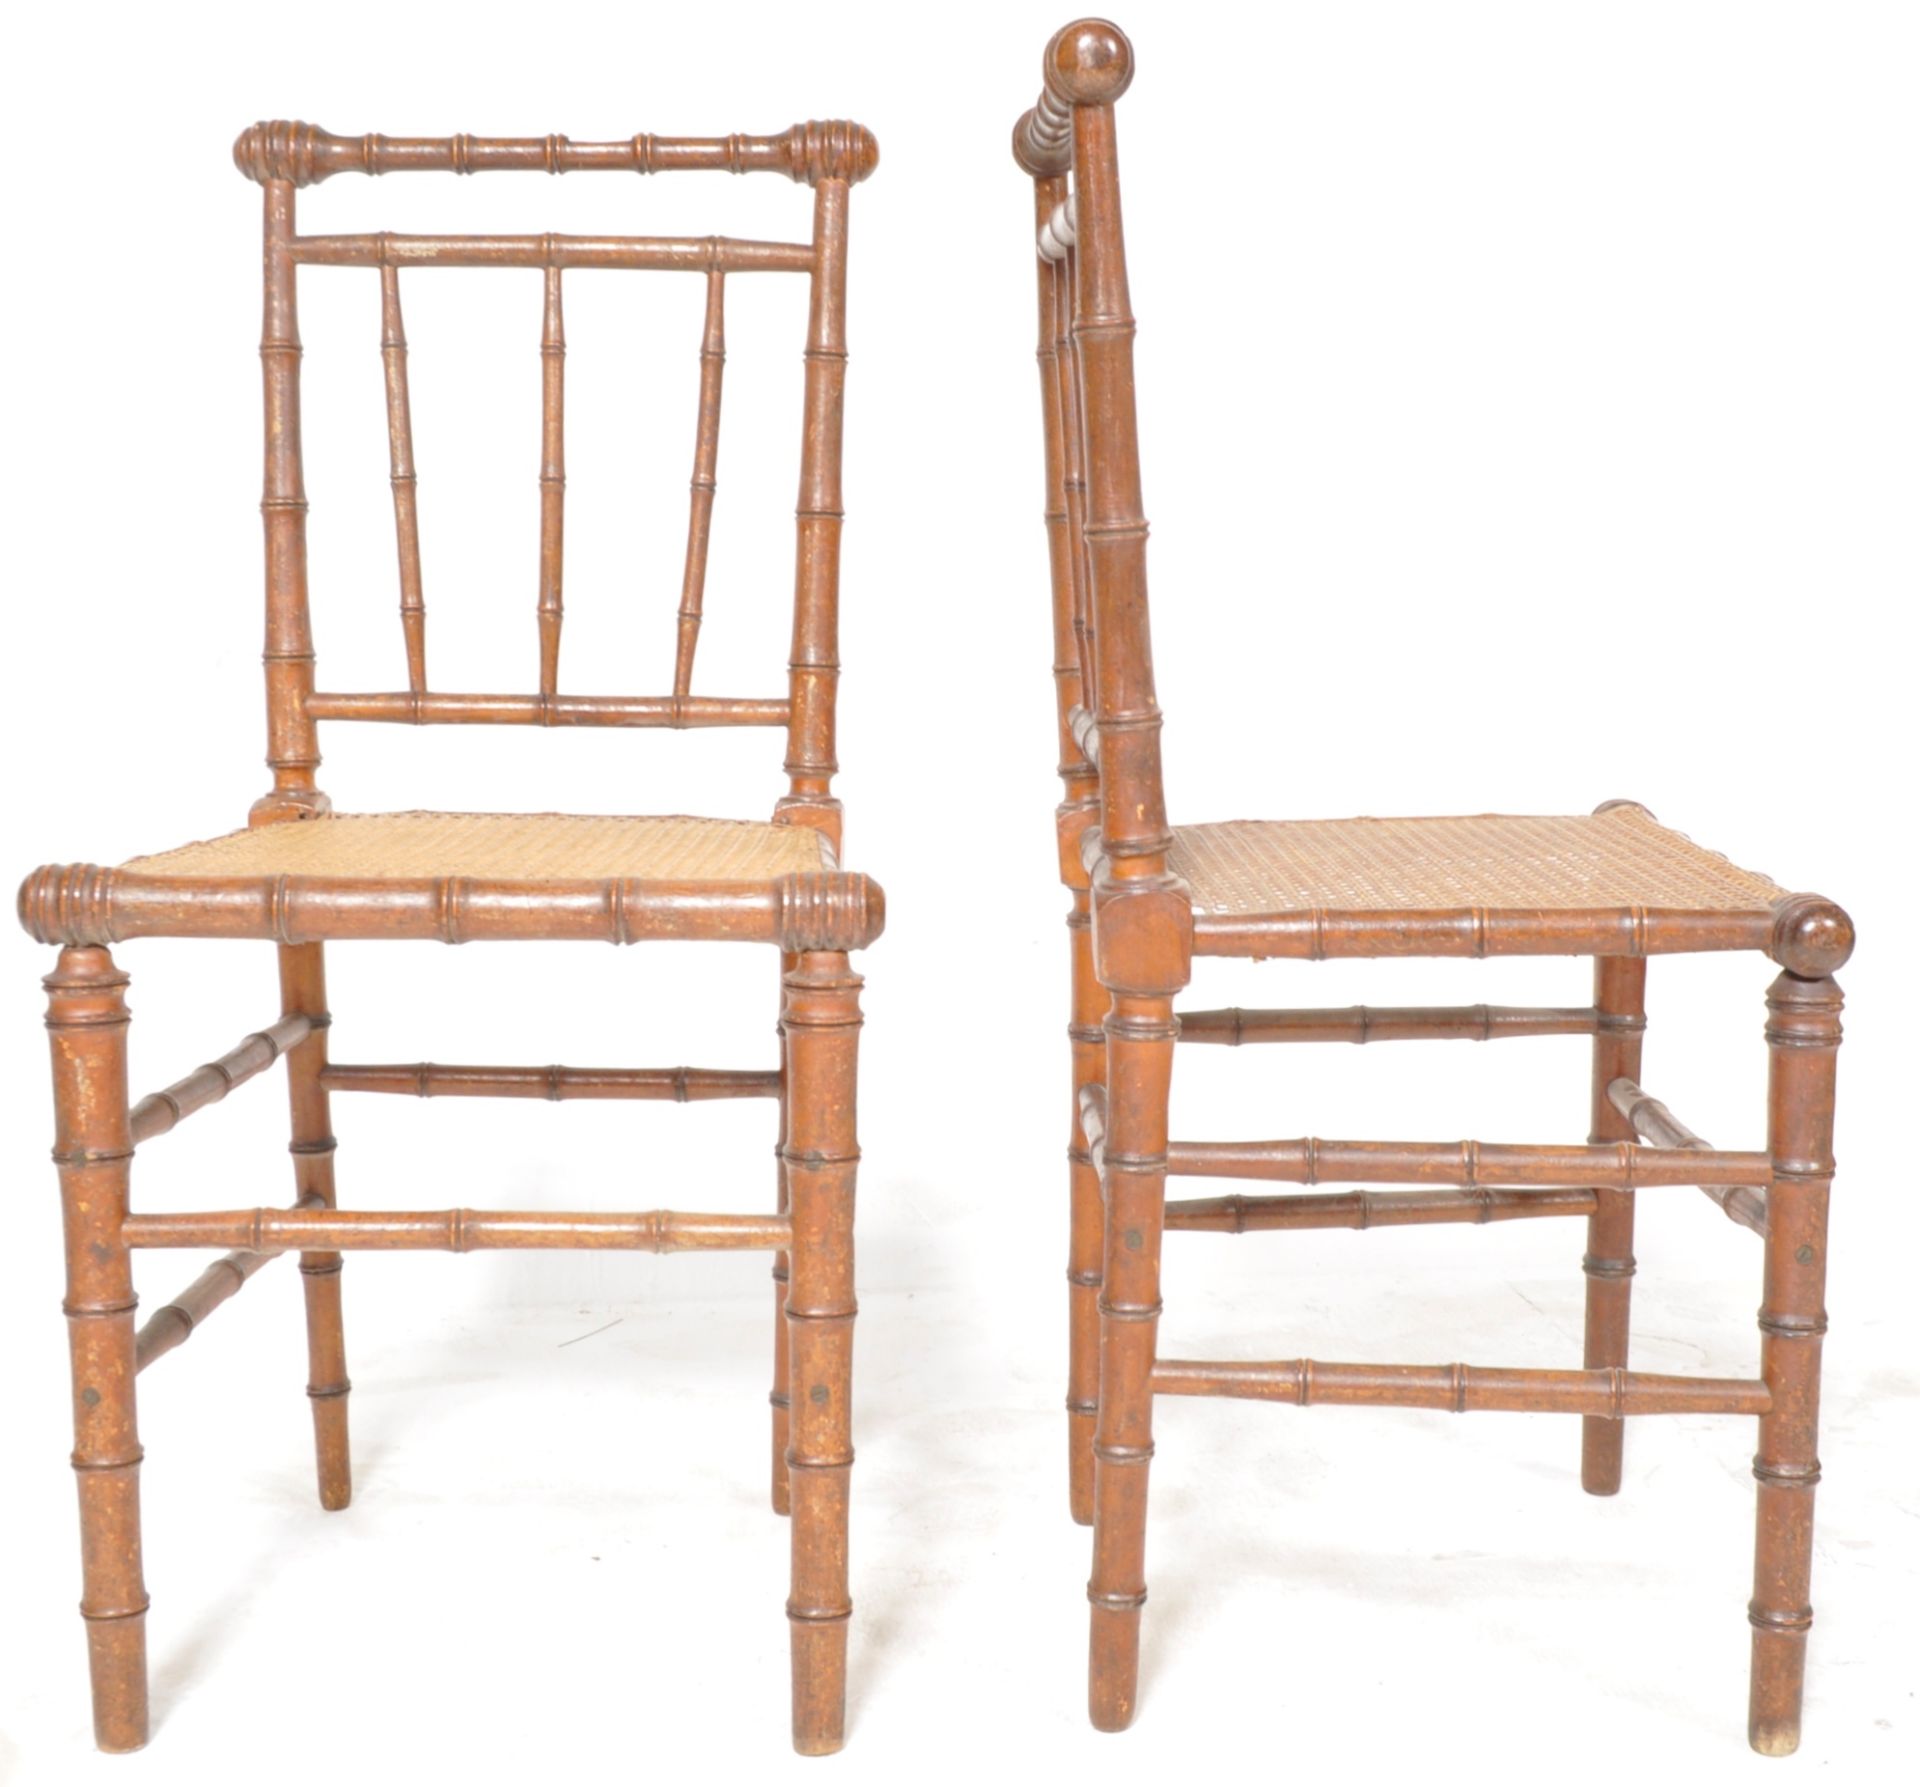 PAIR OF 19TH CENTURY STYLE FAUX BAMBOO CHAIRS - Image 3 of 4